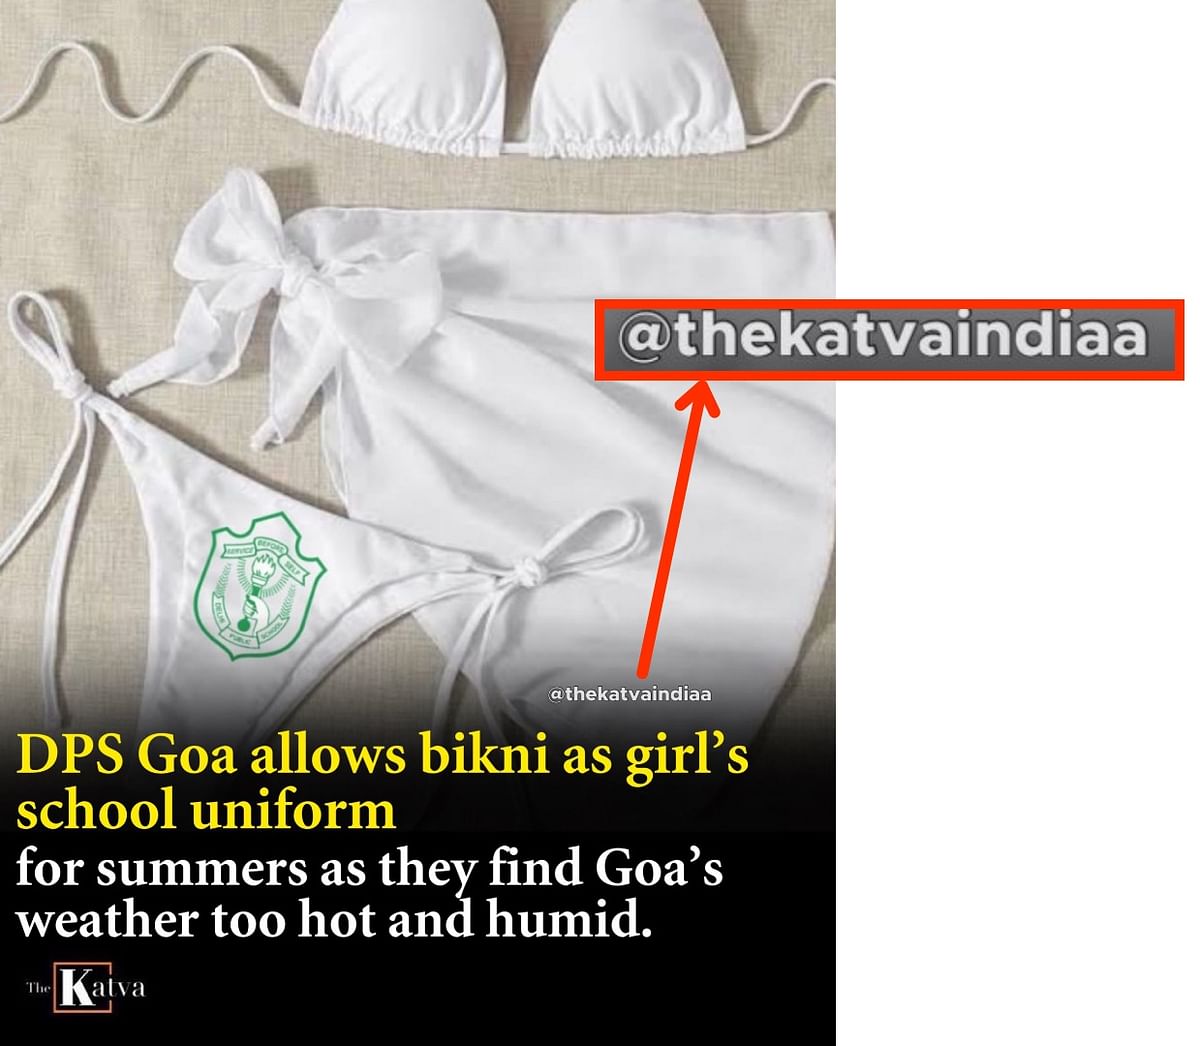 The post about DPS Goa allowing bikinis as school uniforms was created by a satirical page called 'The Katvaa'.